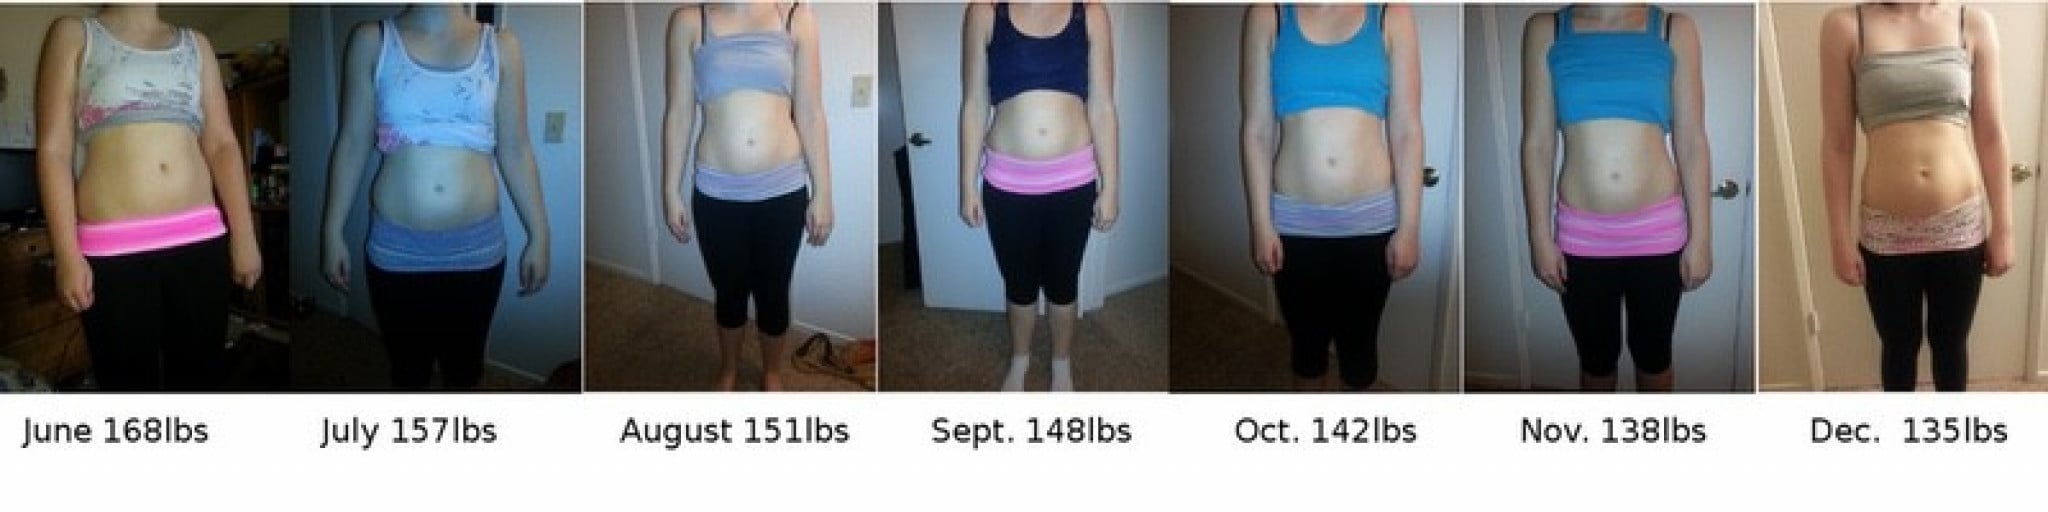 A photo of a 5'6" woman showing a weight reduction from 175 pounds to 135 pounds. A net loss of 40 pounds.